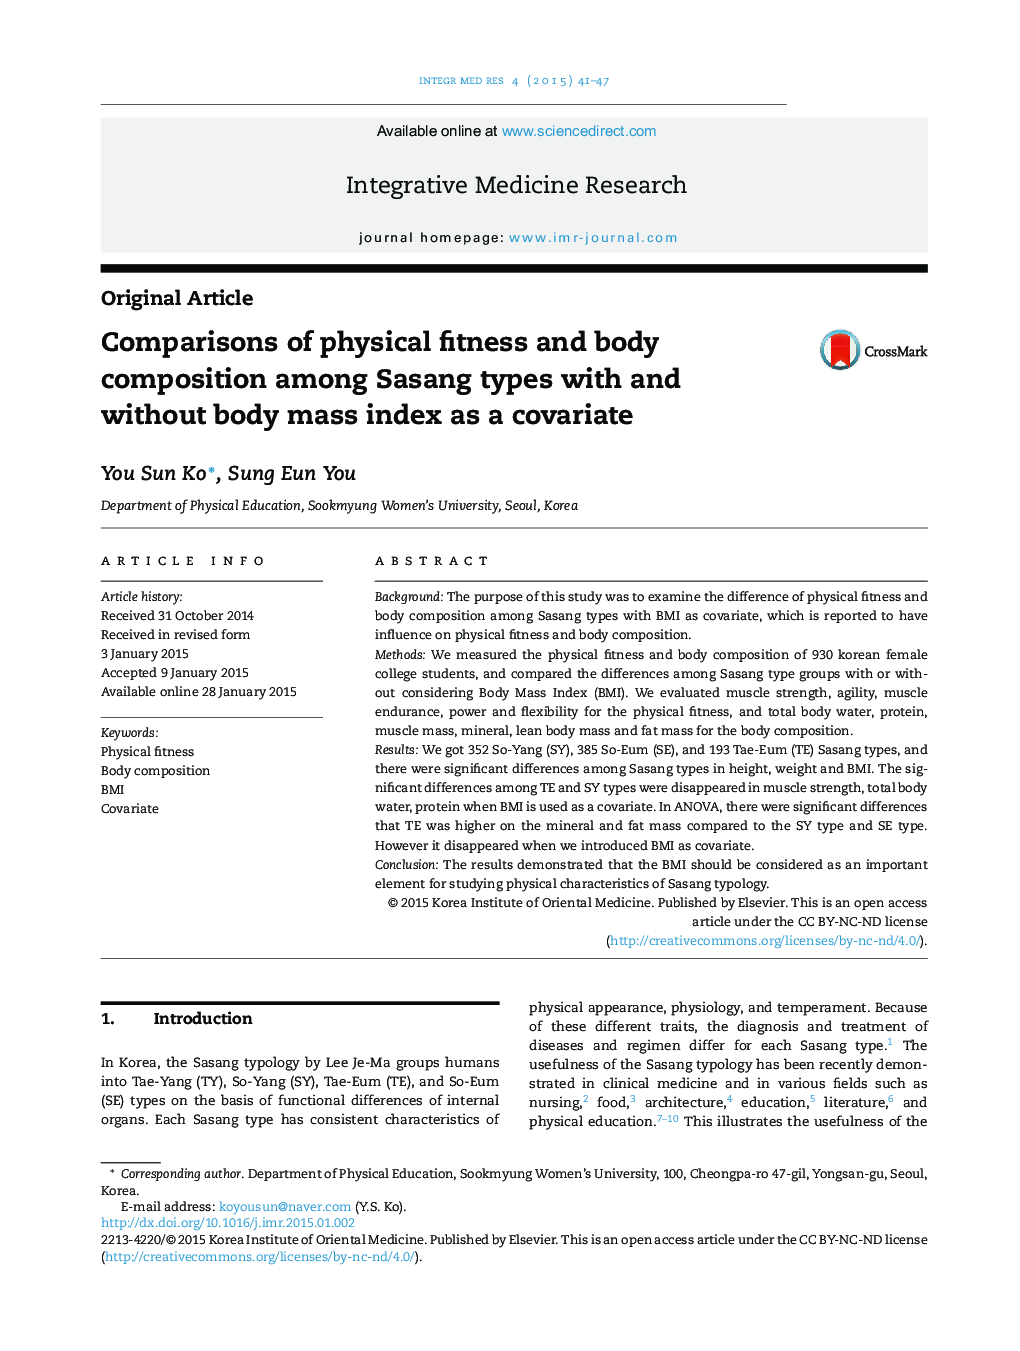 Comparisons of physical fitness and body composition among Sasang types with and without body mass index as a covariate